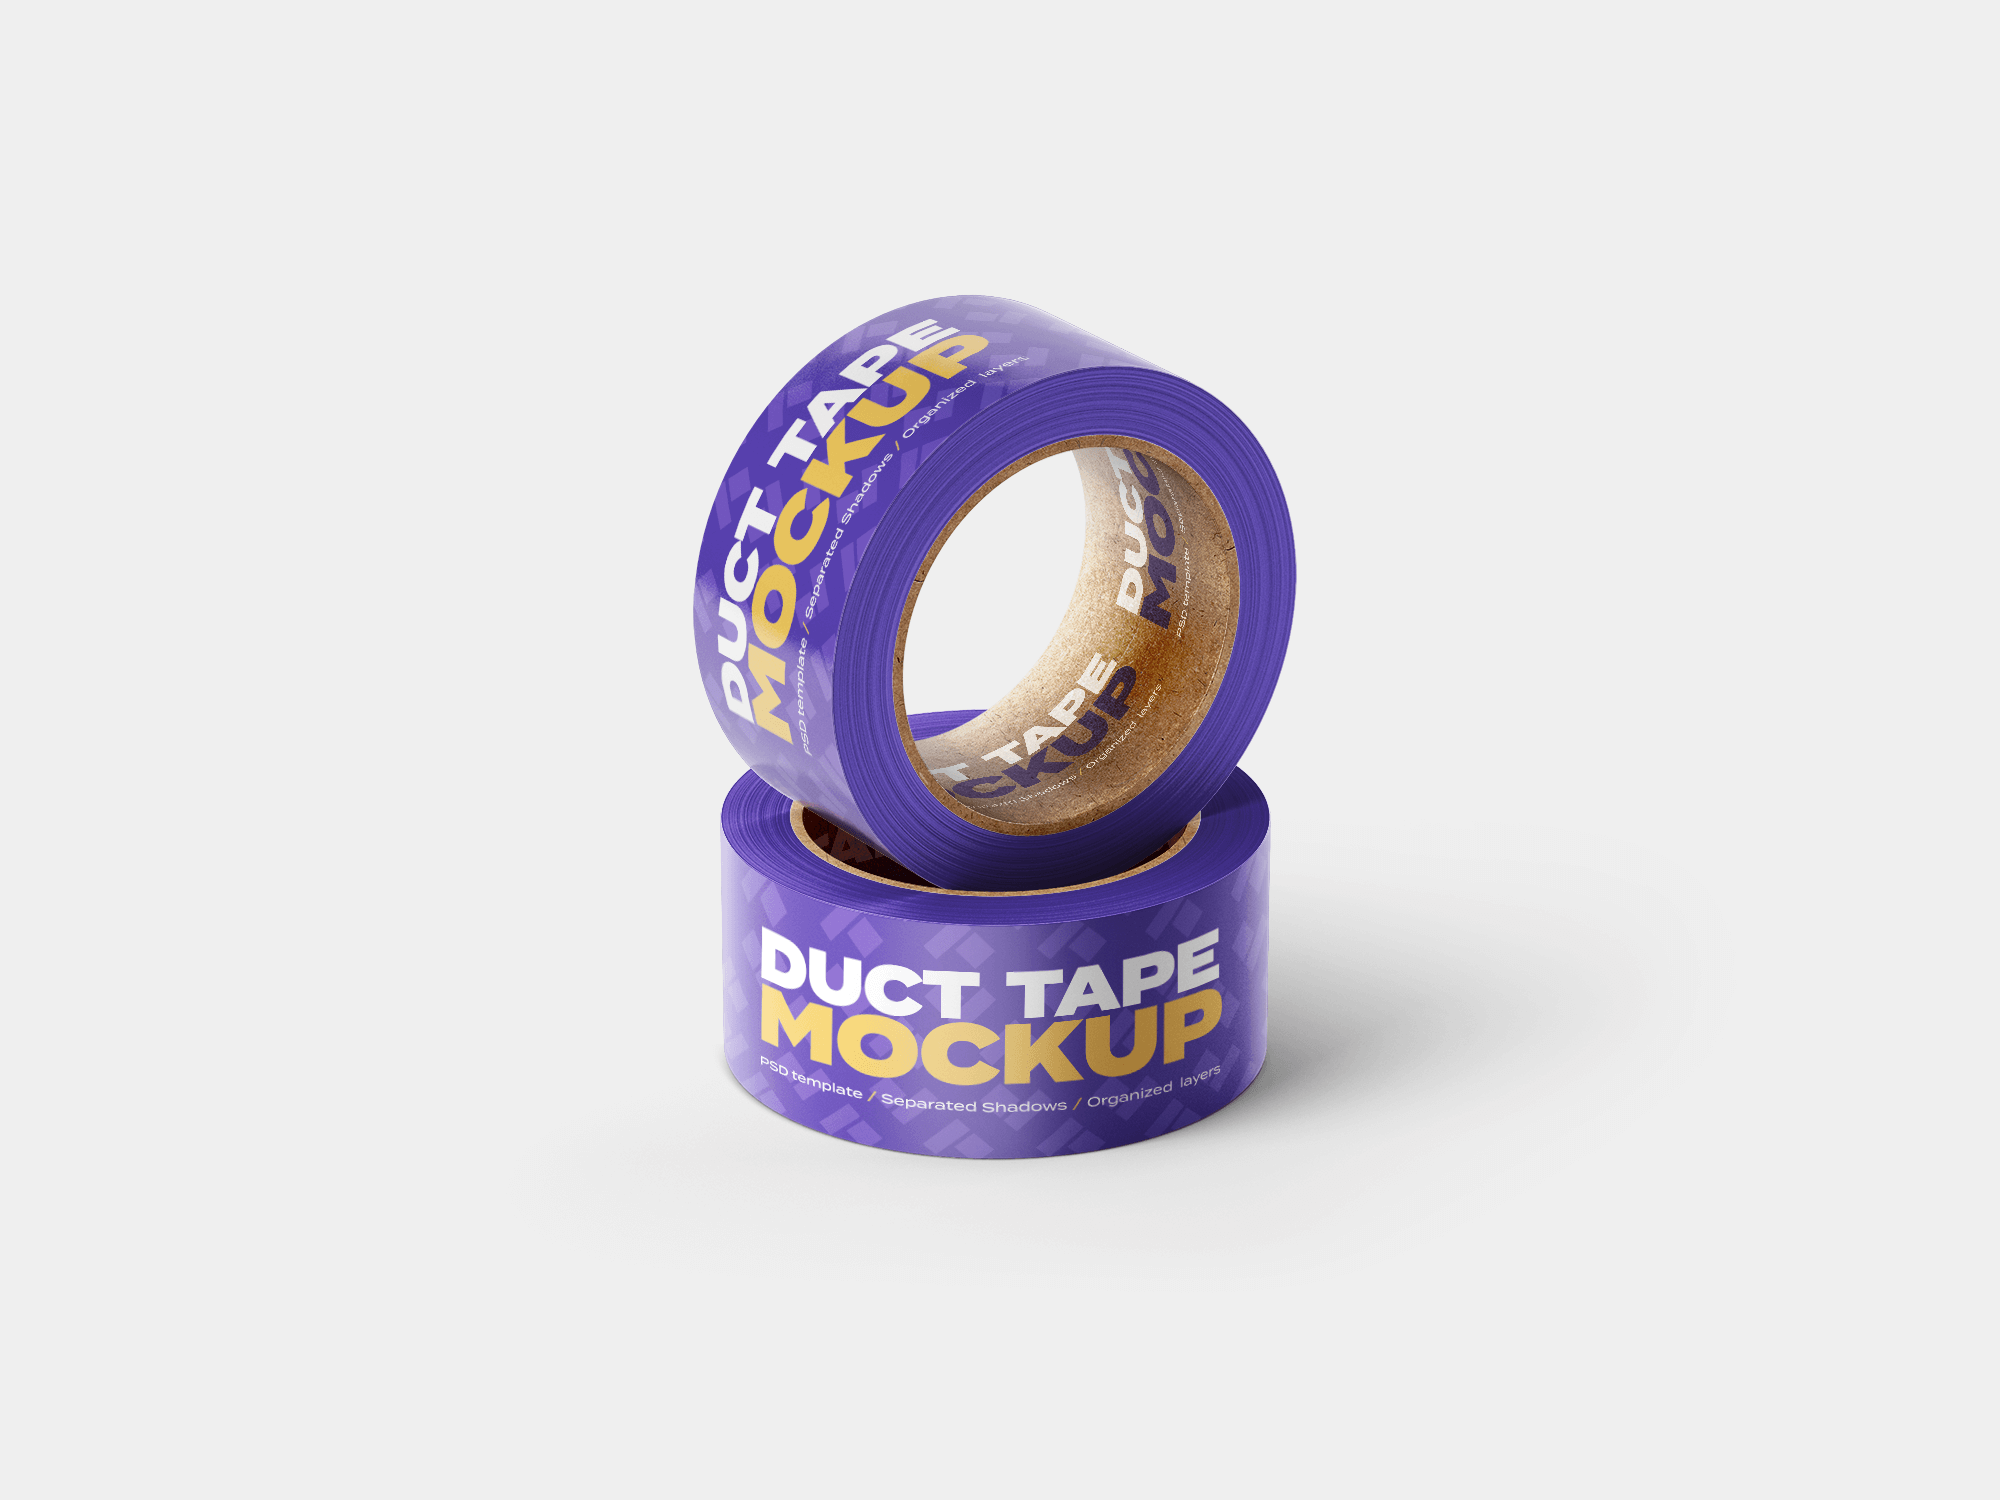 Free Duct Tape Roll Mockup